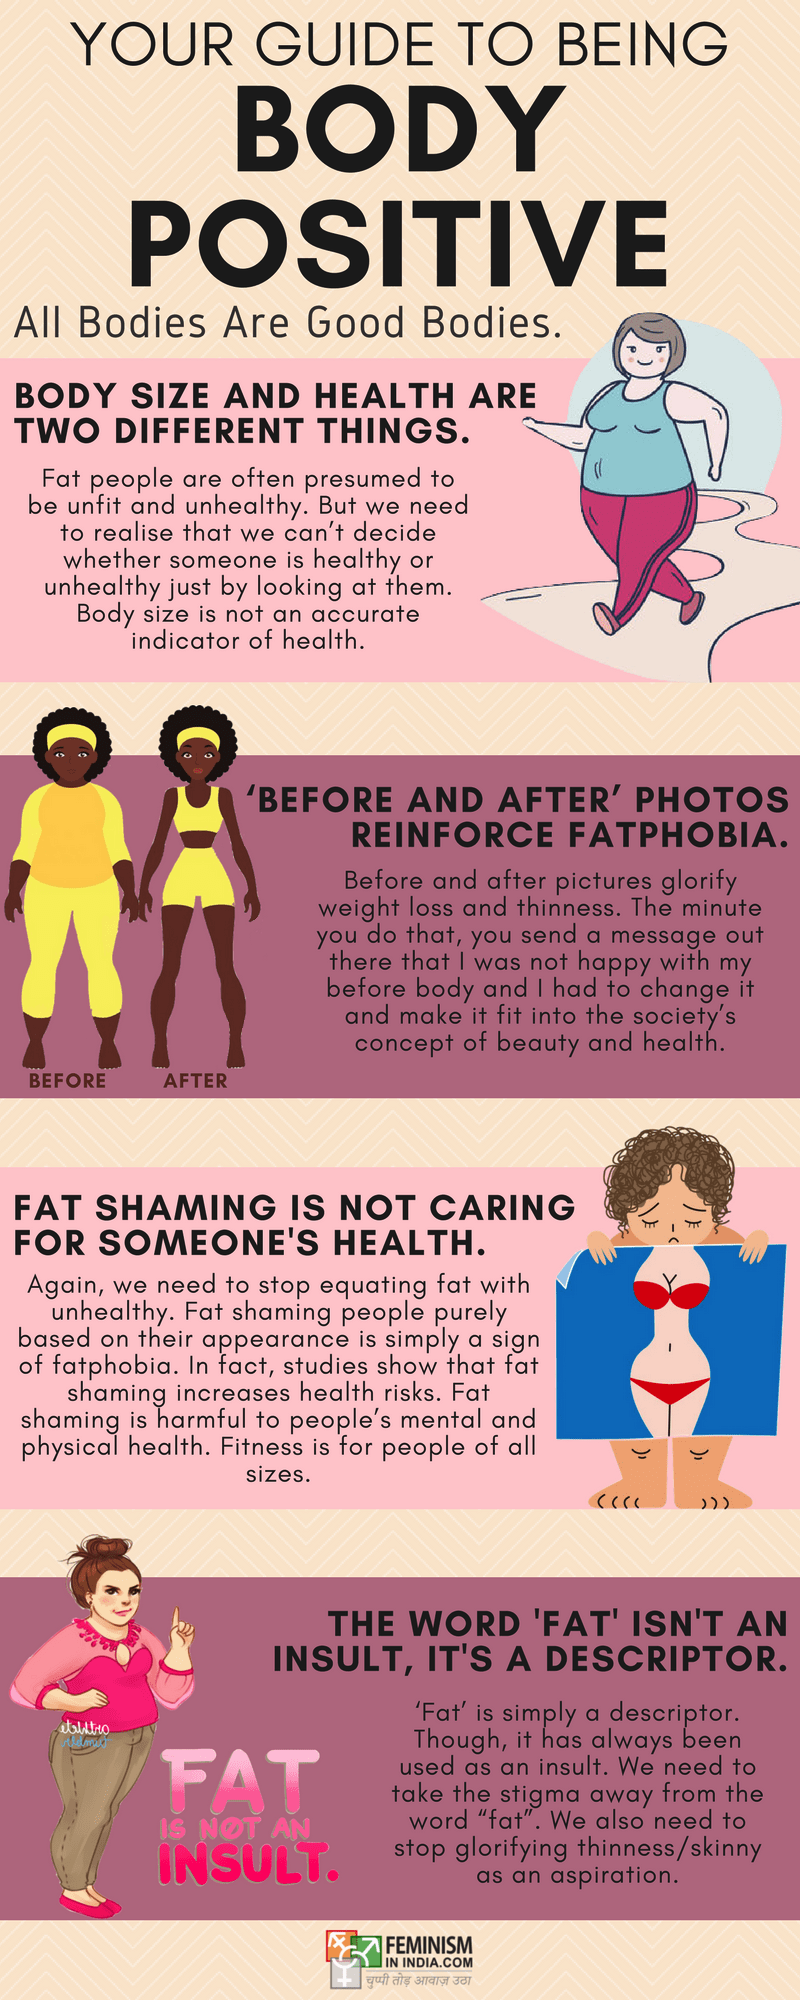 Your Guide To Being Body Positive (Infographic)